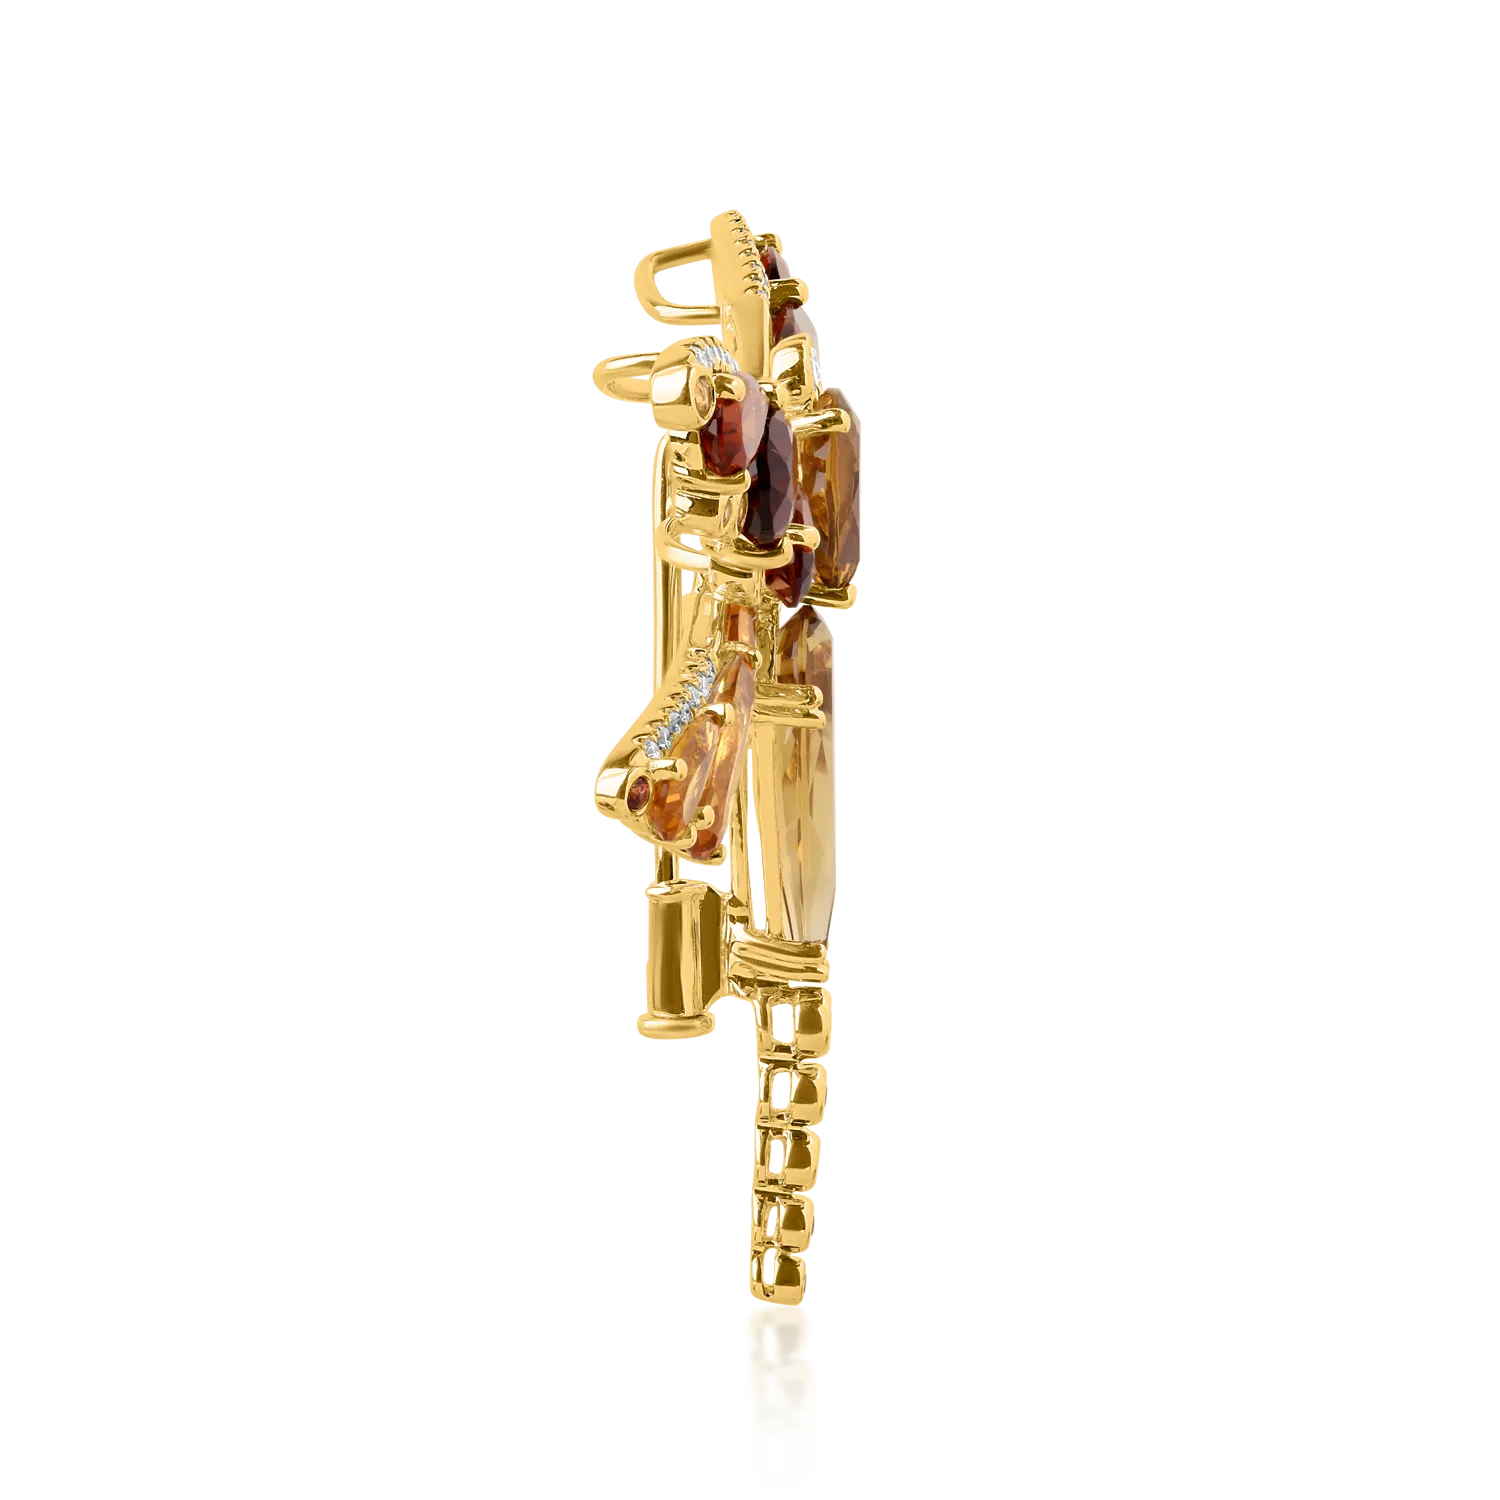 18K yellow gold dragonfly brooch with 11.21ct precious and semiprecious stones